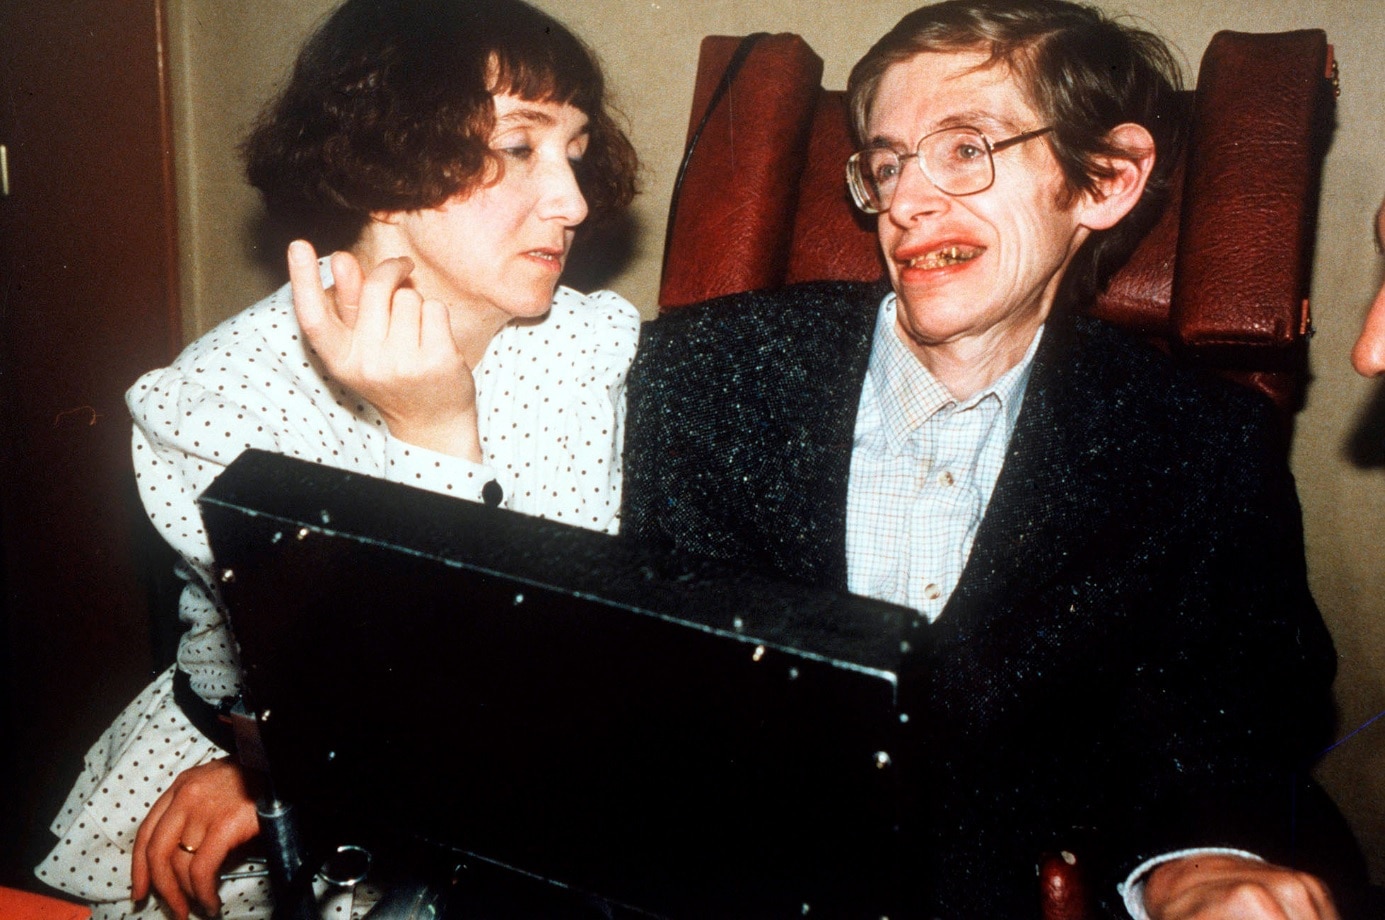 British astrophysicist Stephen Hawking in 1989 at the age of 47 at Cambridge University (AAP)